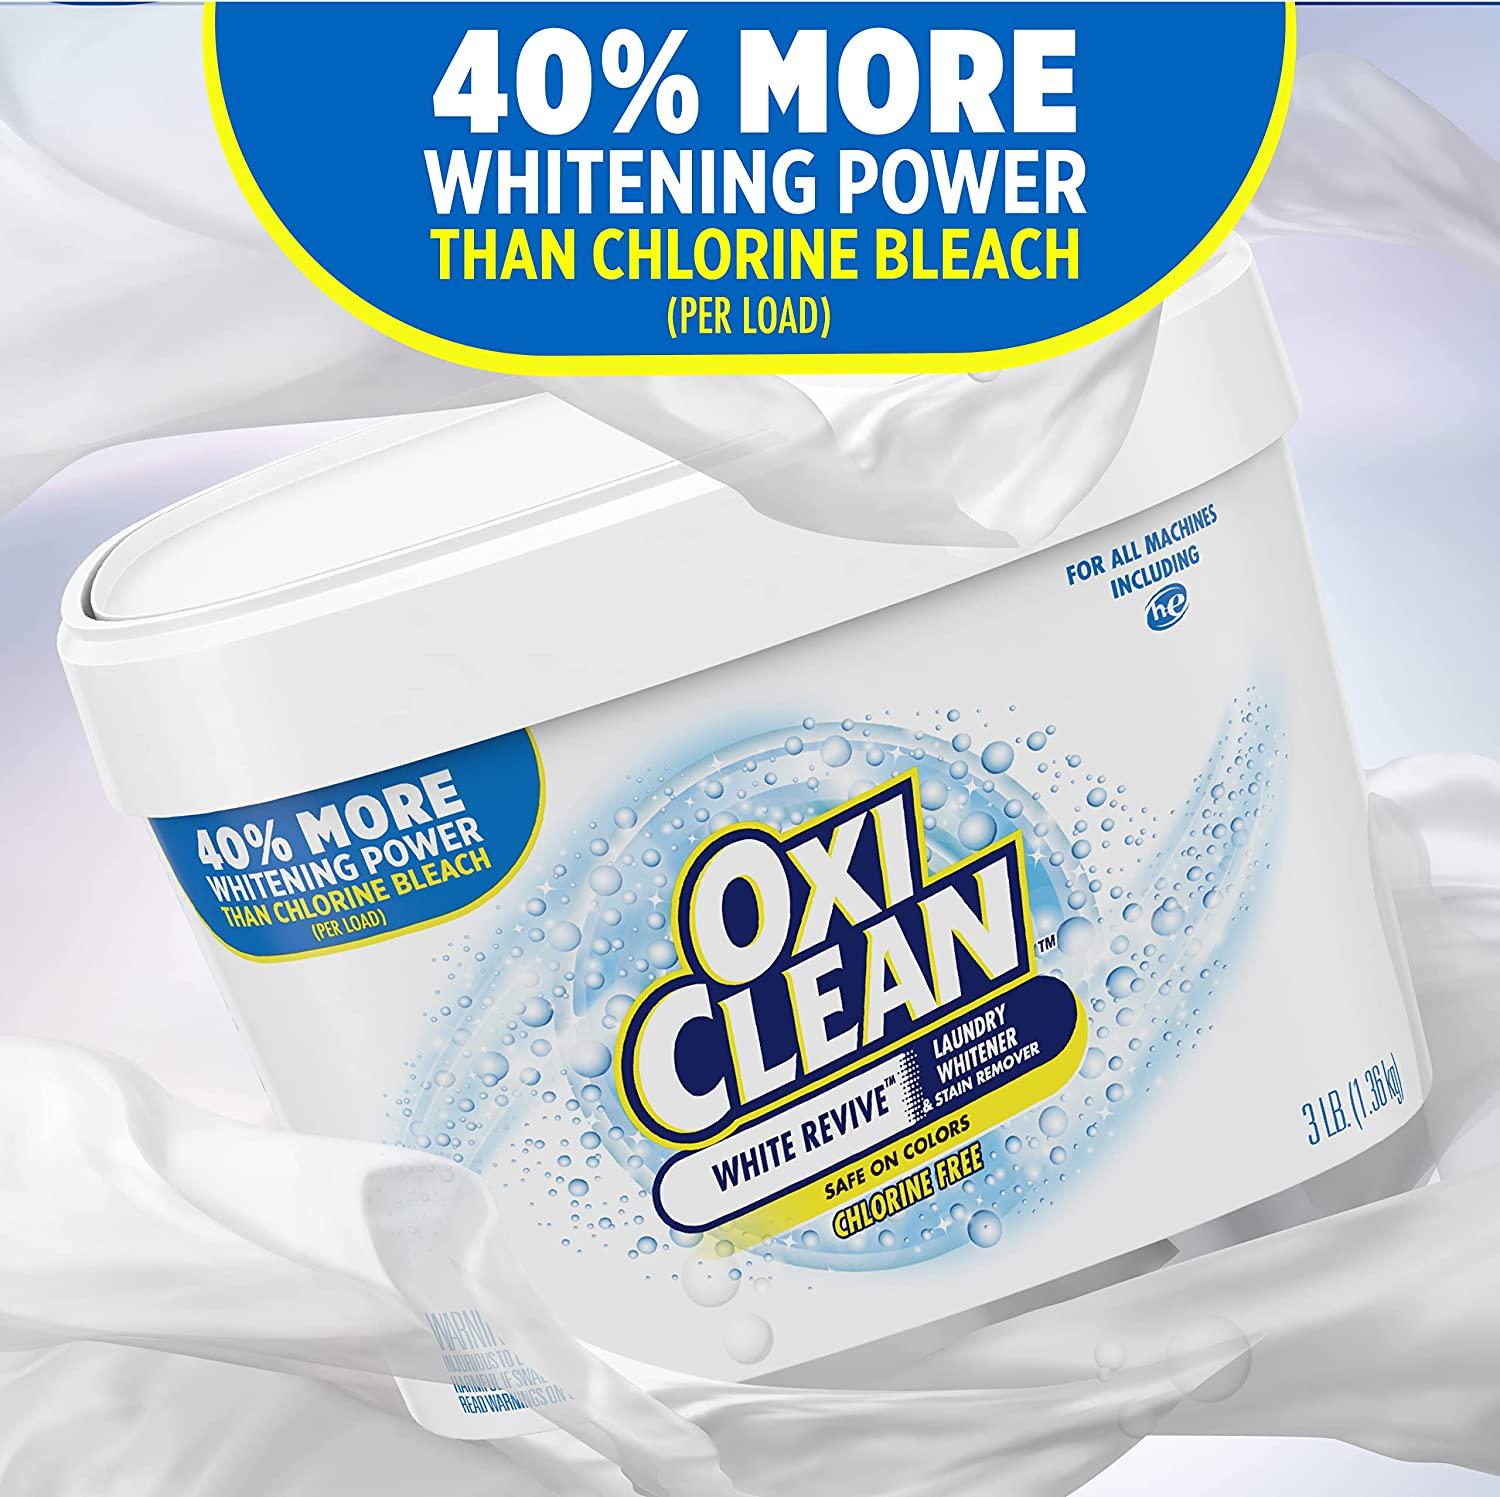 OxiClean White Revive Laundry Whitener And Stain Remover - 3 Lbs